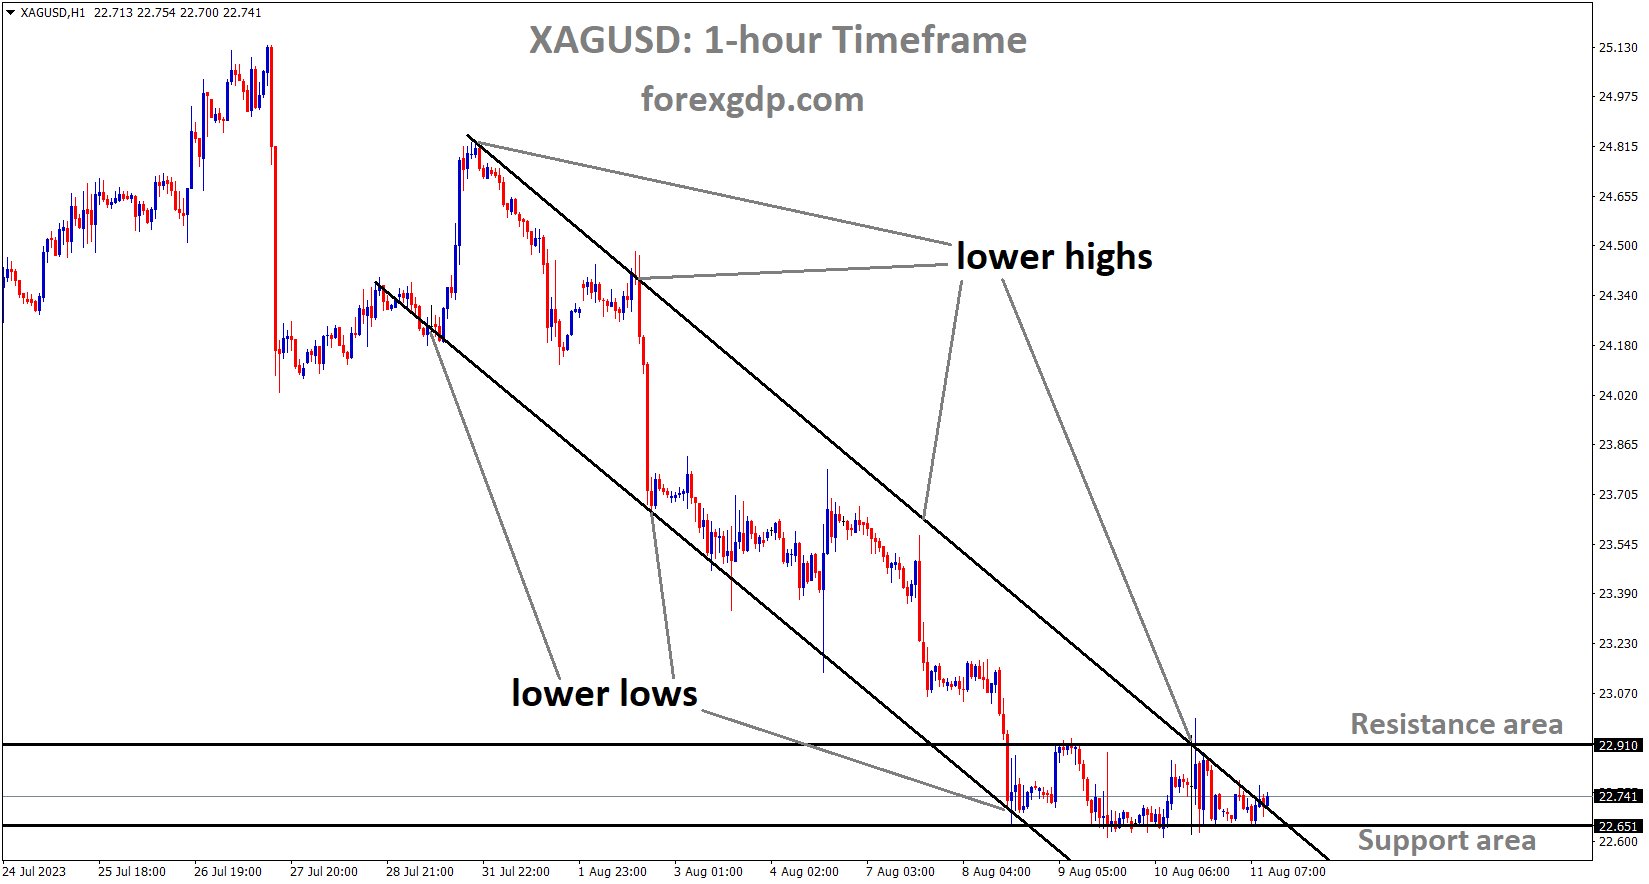 XAGUSD Silver price is moving in the Descending channel